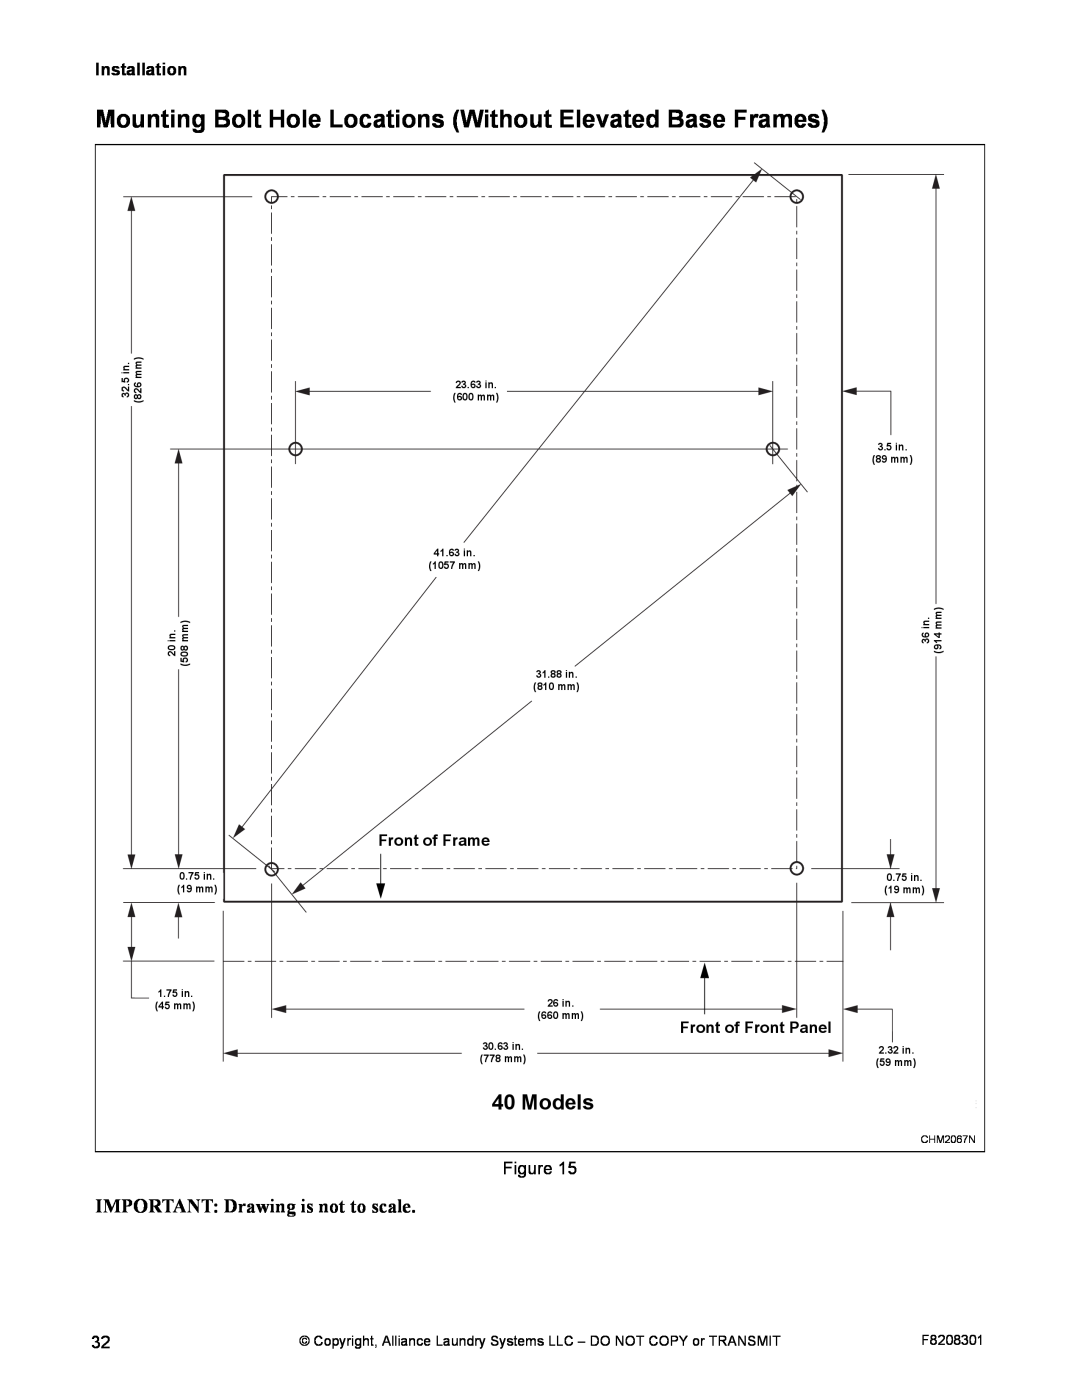 Alliance Laundry Systems CHM1772C manual Models, Mounting Bolt Hole Locations Without Elevated Base Frames, Installation 